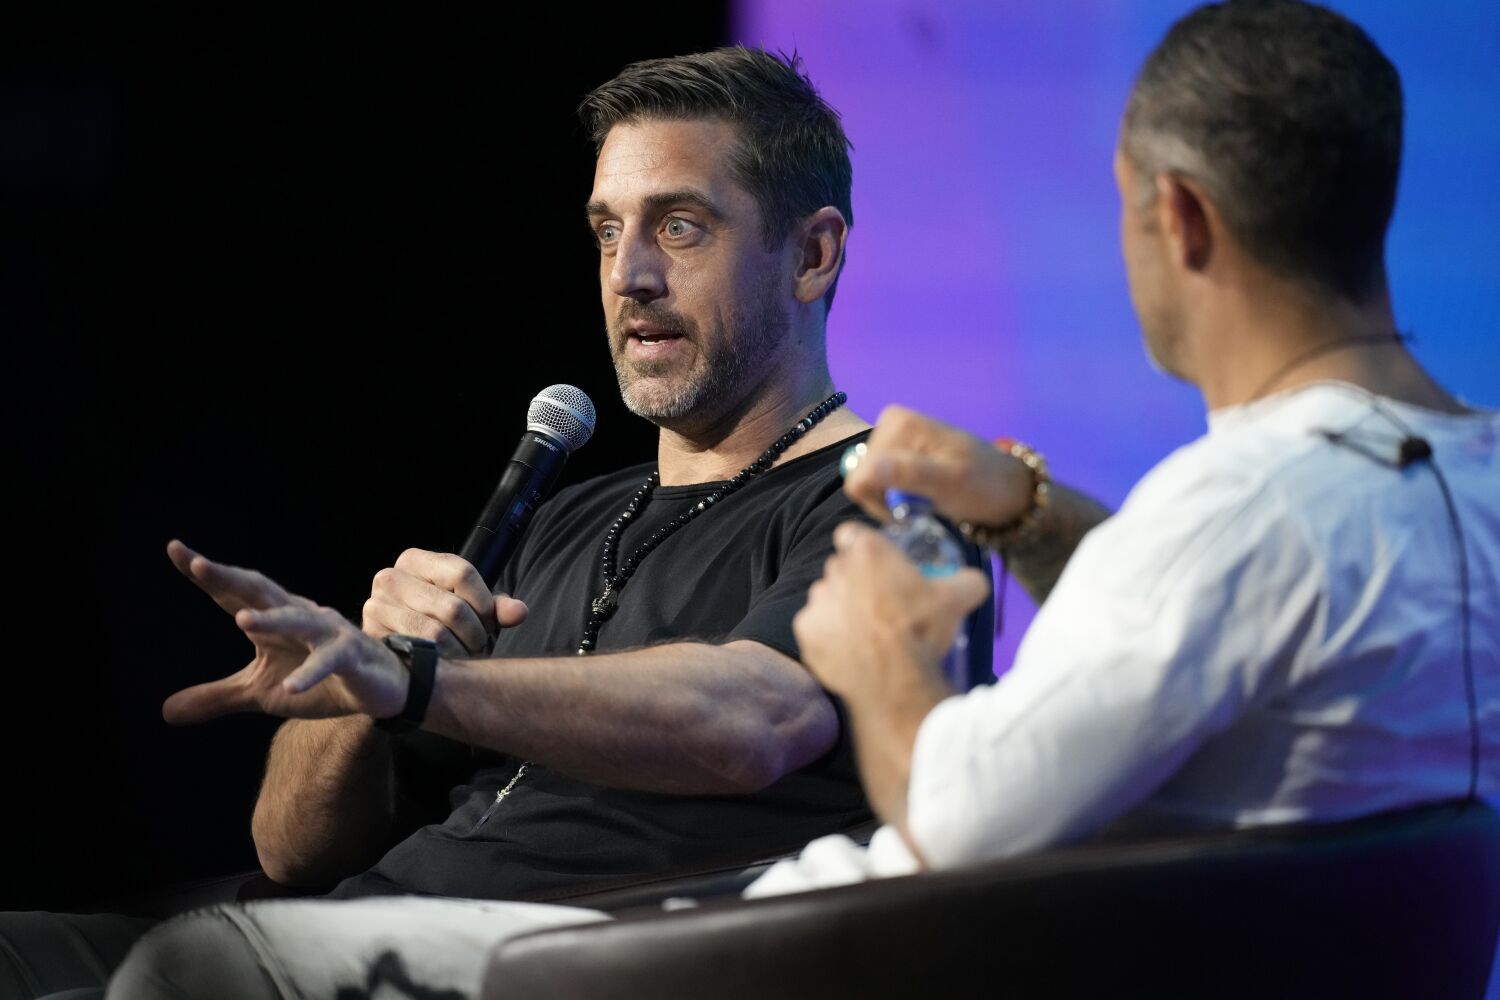 What a trip: Aaron Rodgers says psychedelics have given him 'a deeper self-love'